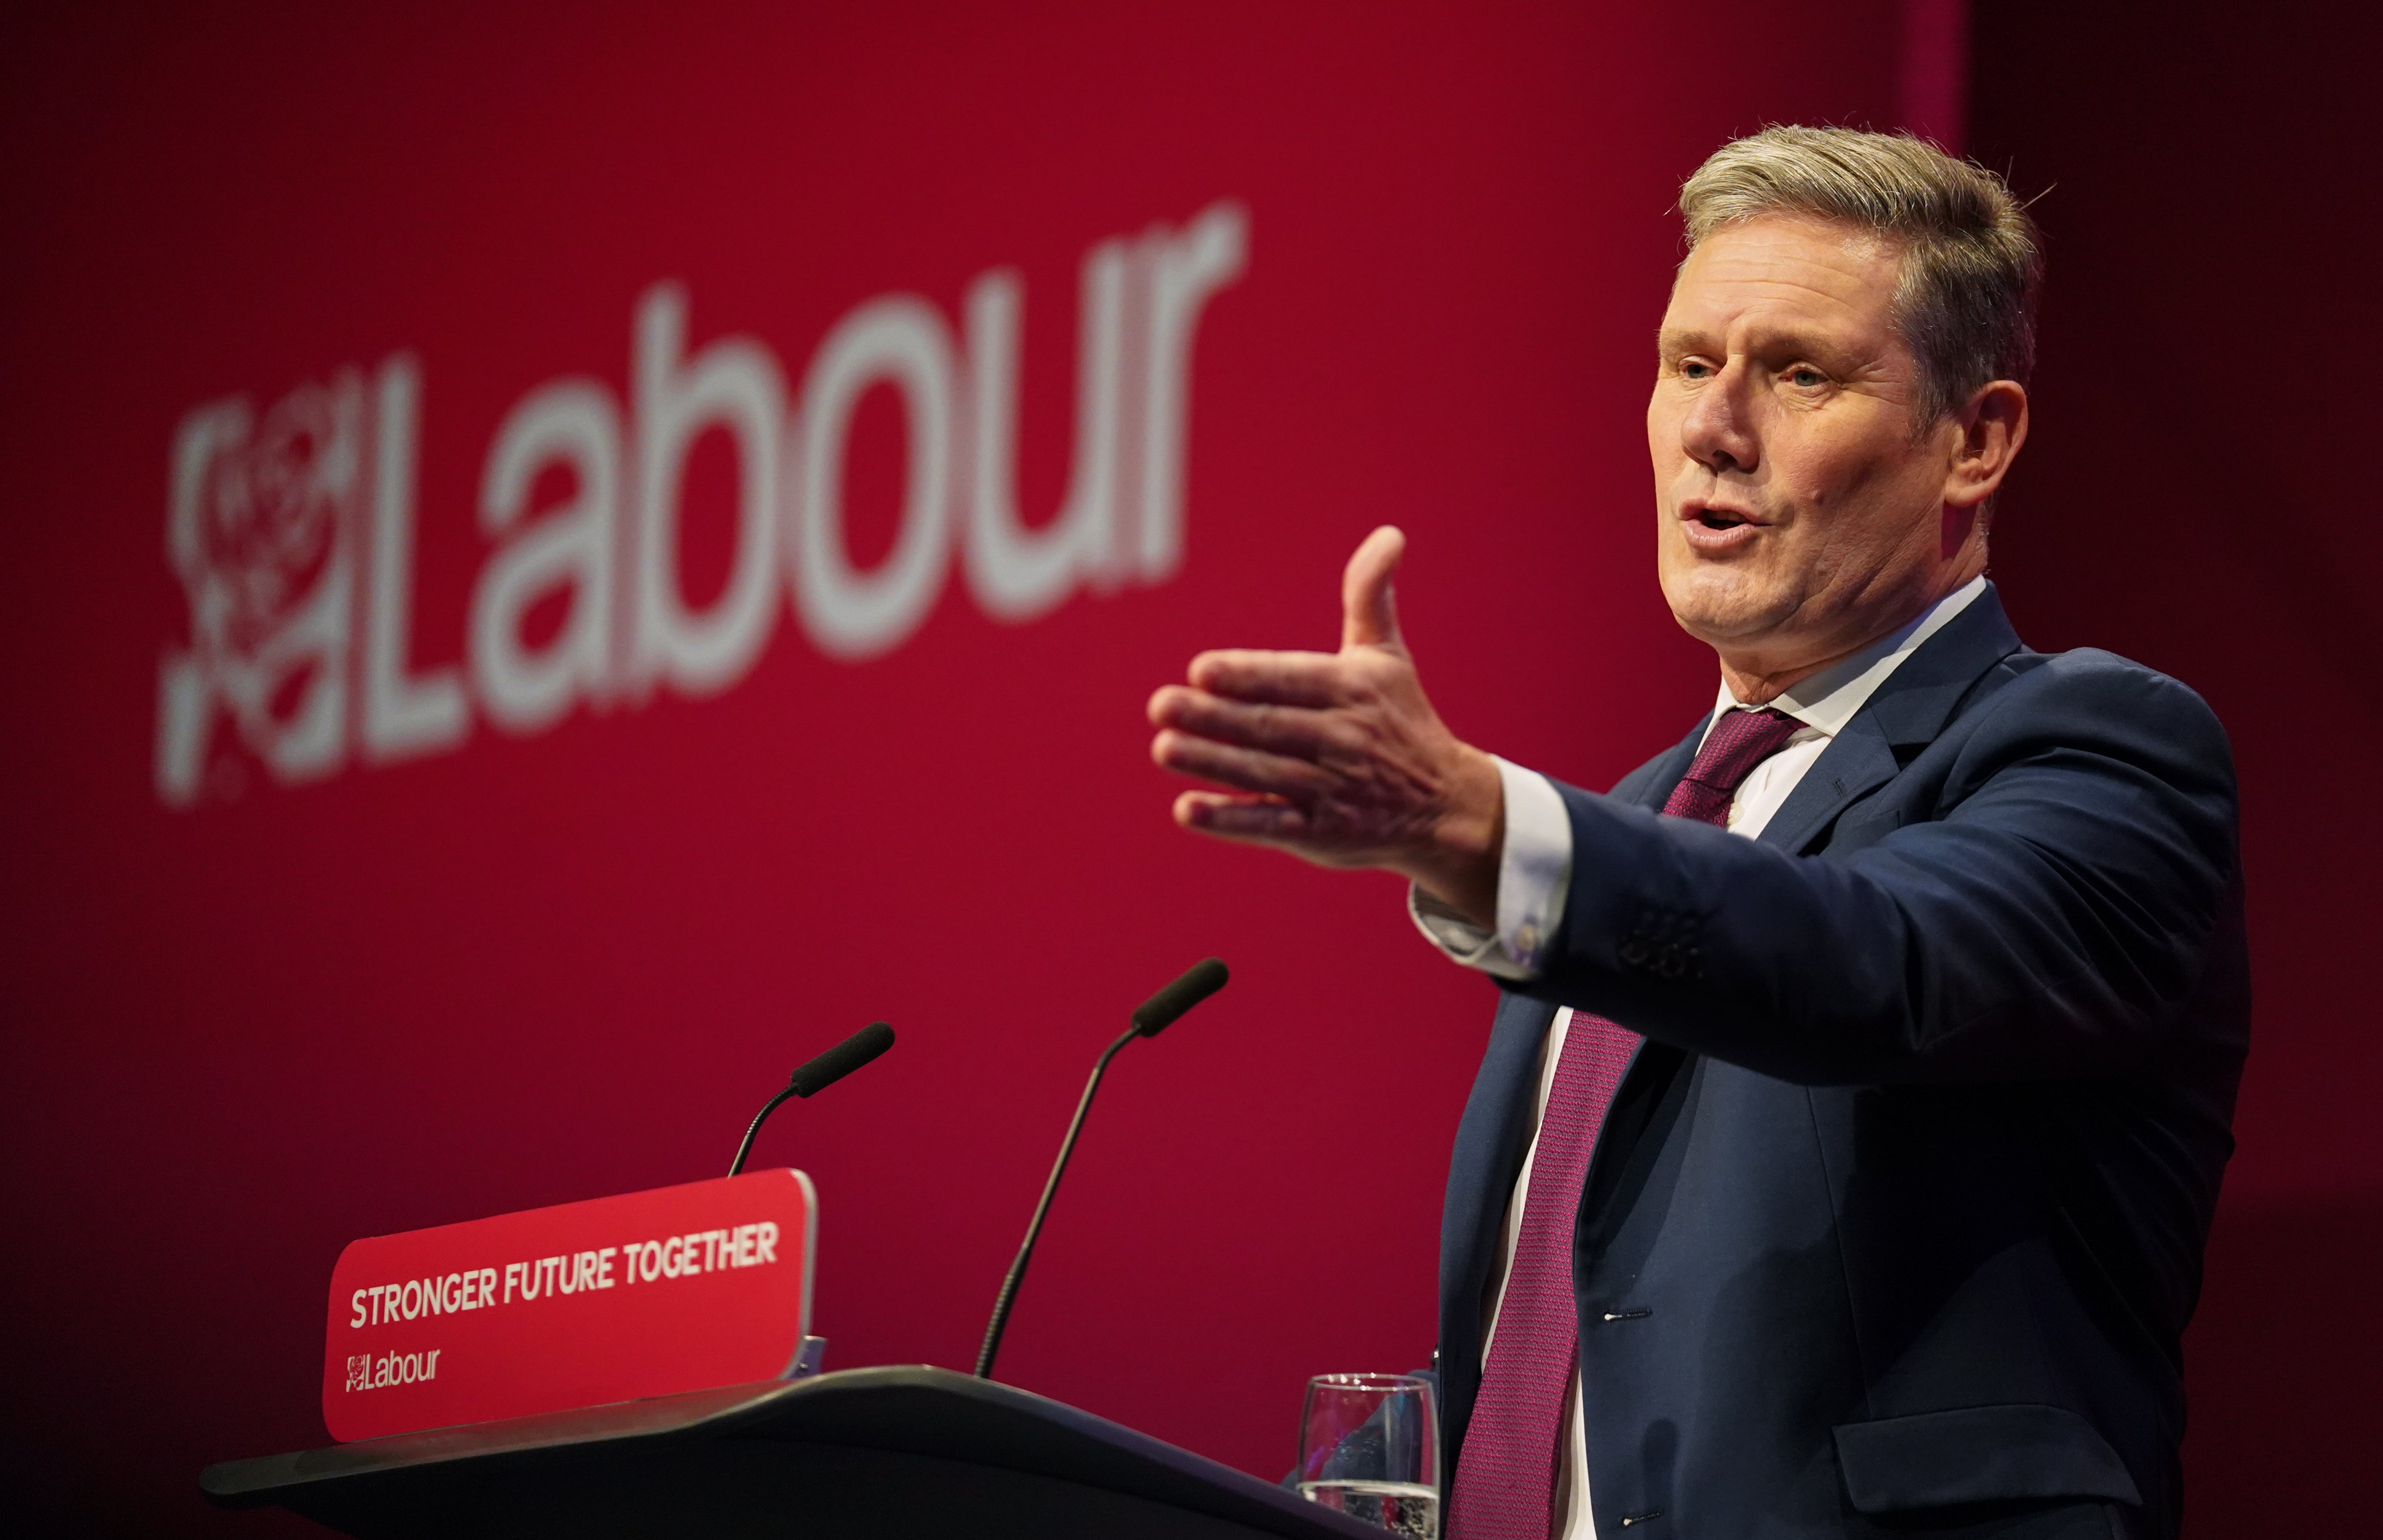 Starmer told conference Labour would ‘address the chronic problems revealed by Covid, with the kindness and the togetherness that got us through’